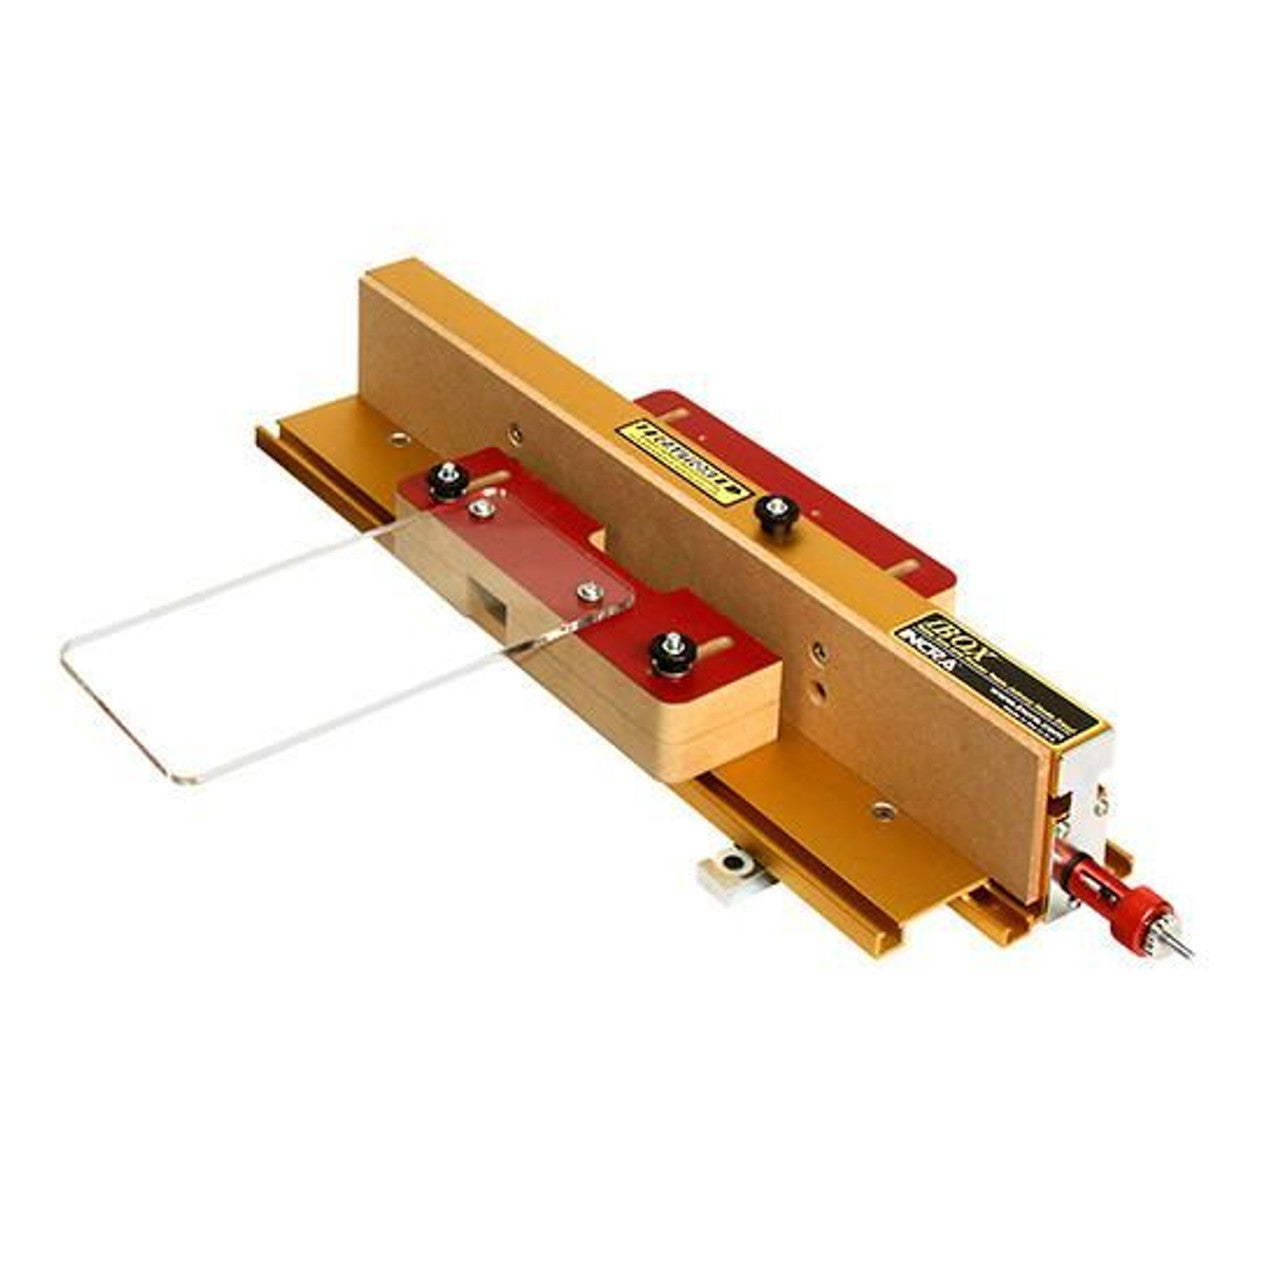 Incra I-Box Jig for Box Joints